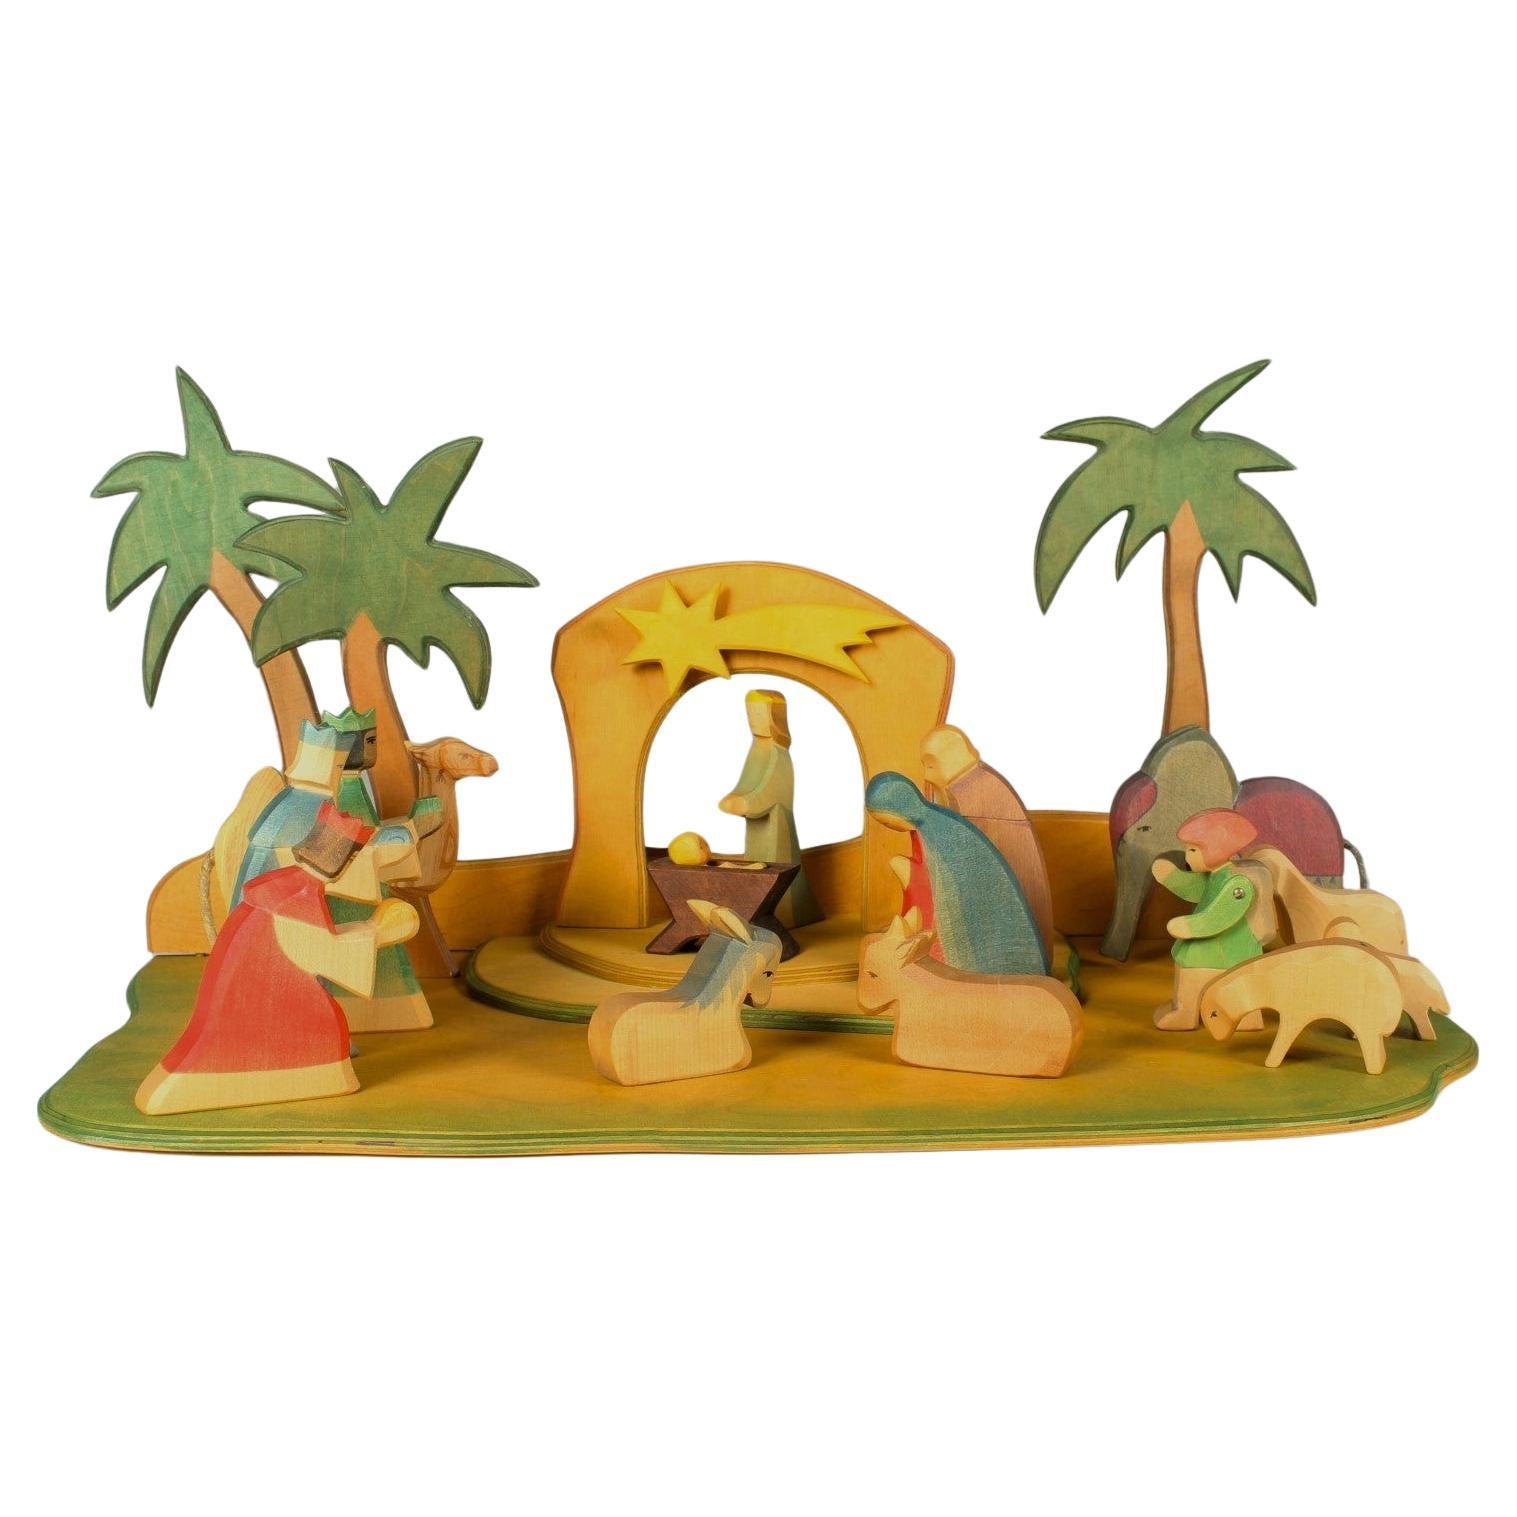 Large 16-Piece Nativity Set by Ostheimer, Handcarved, Certified, Christmas Crib For Sale